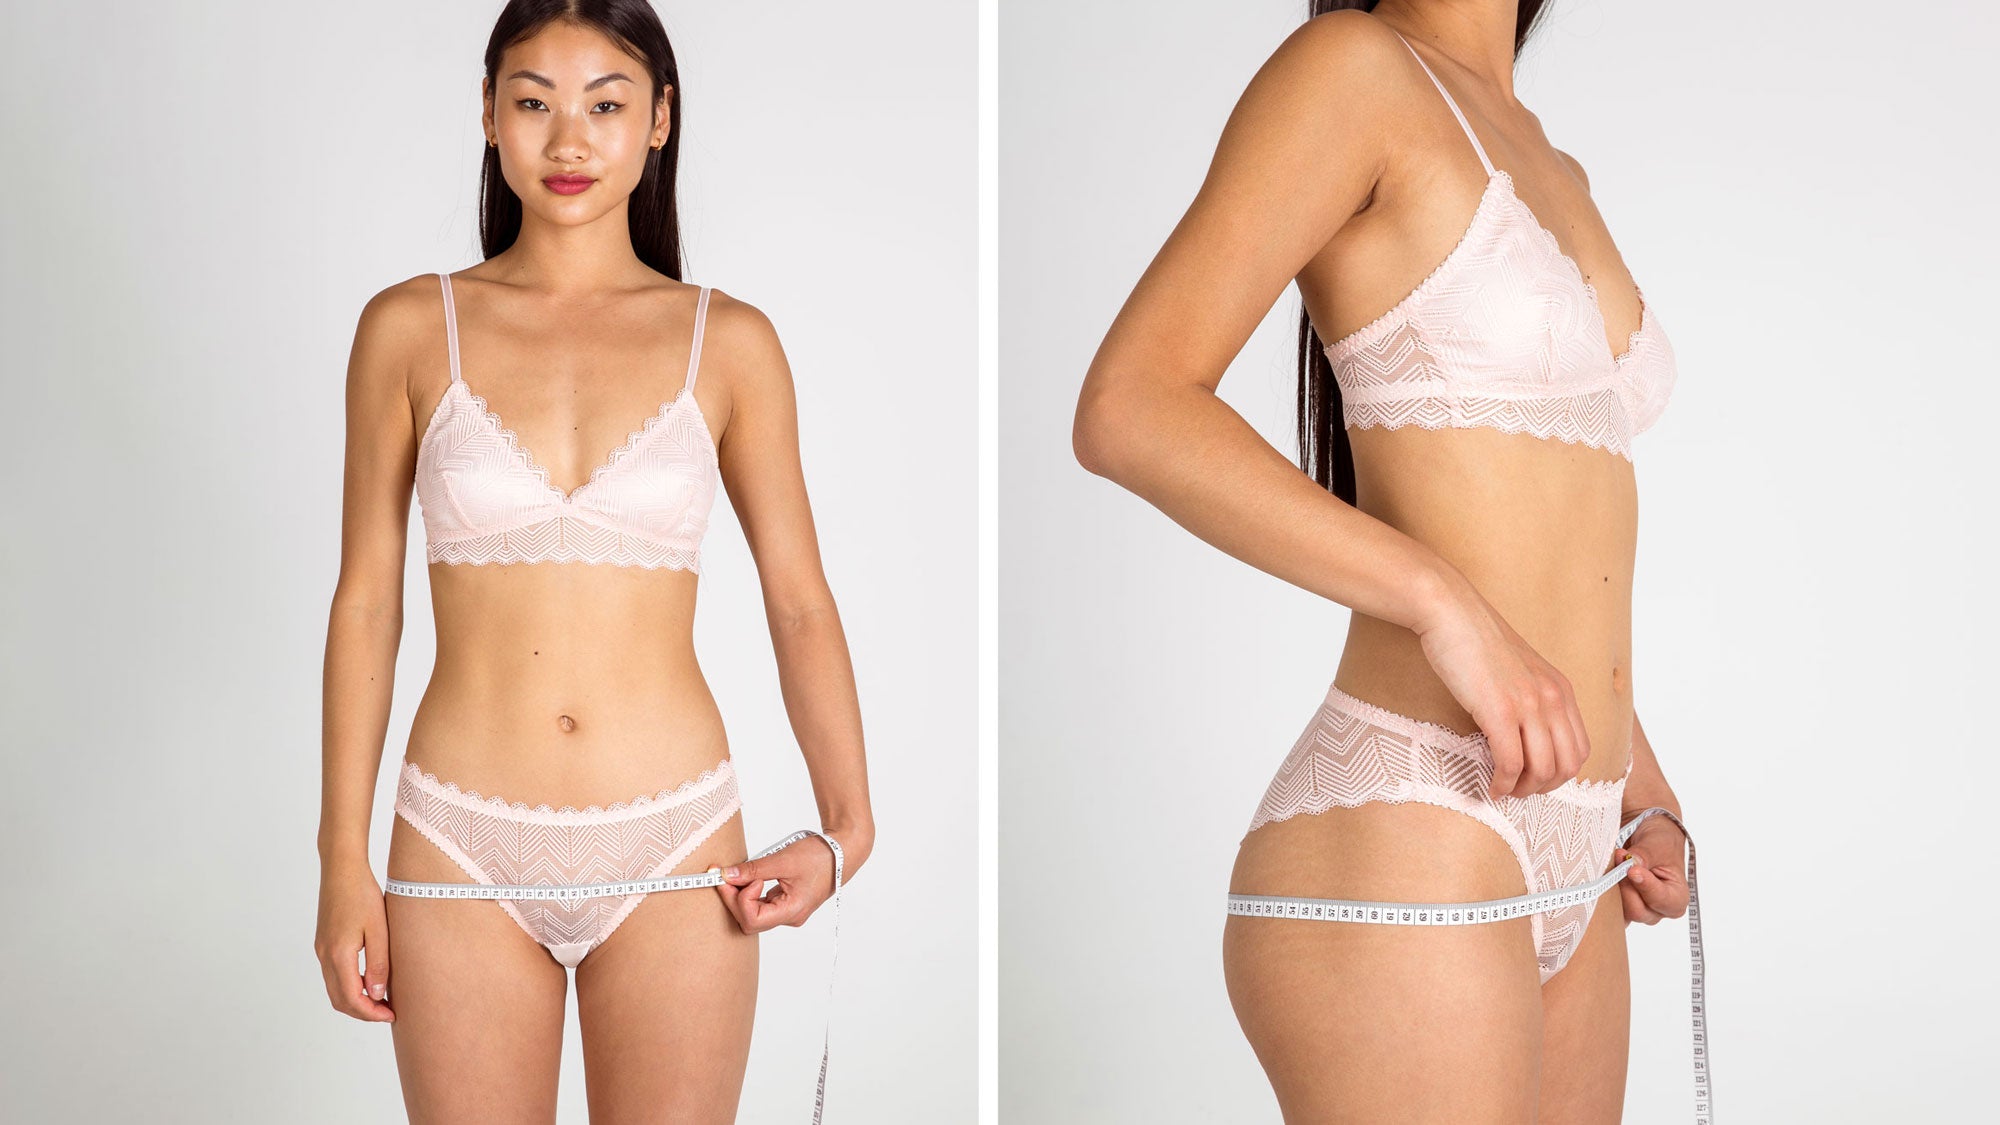 Shop luxury lingerie in the US